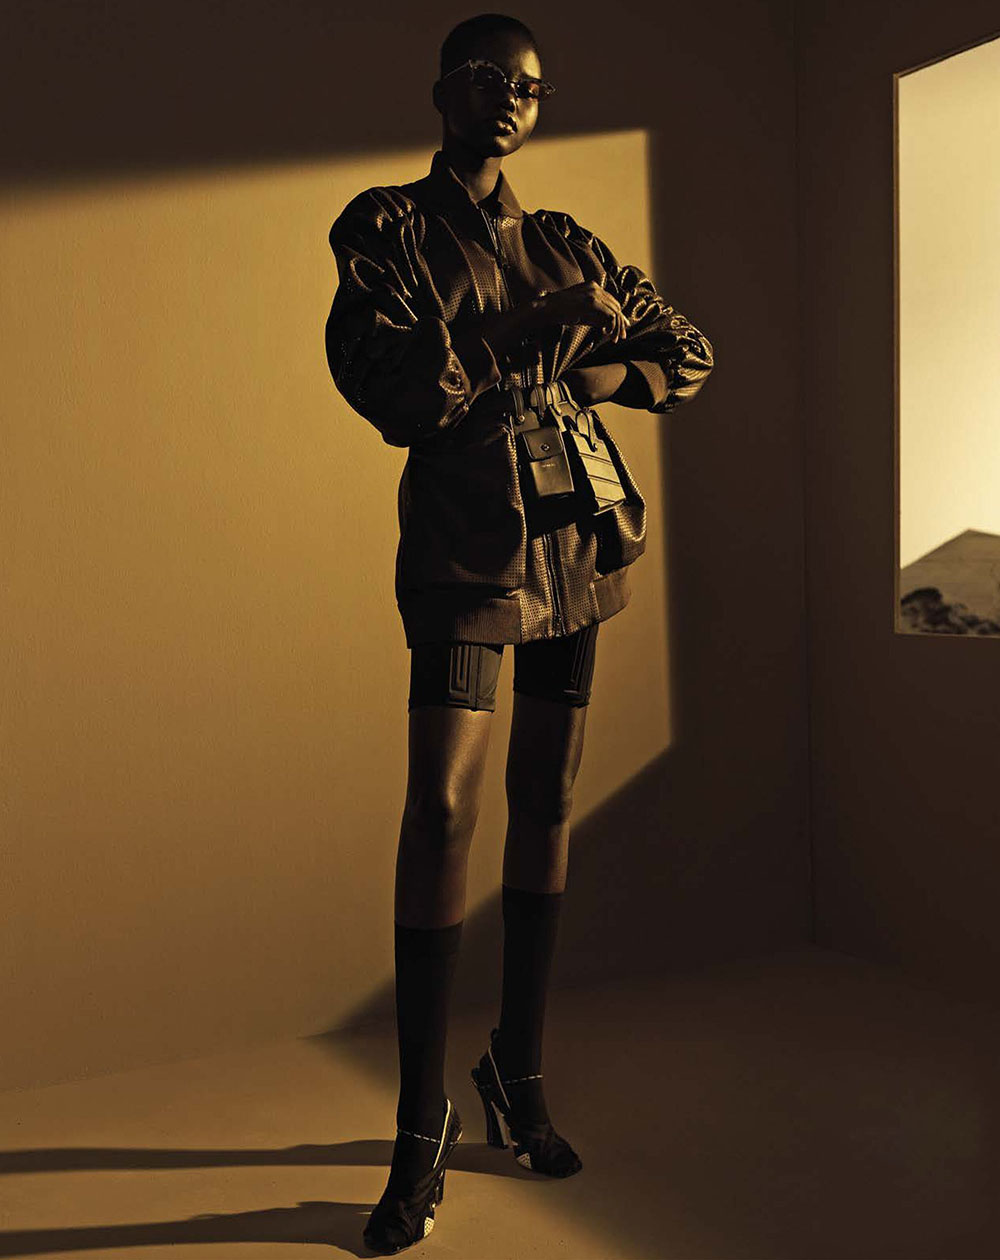 Adut Akech by Josh Olins for Vogue Italia April 2019